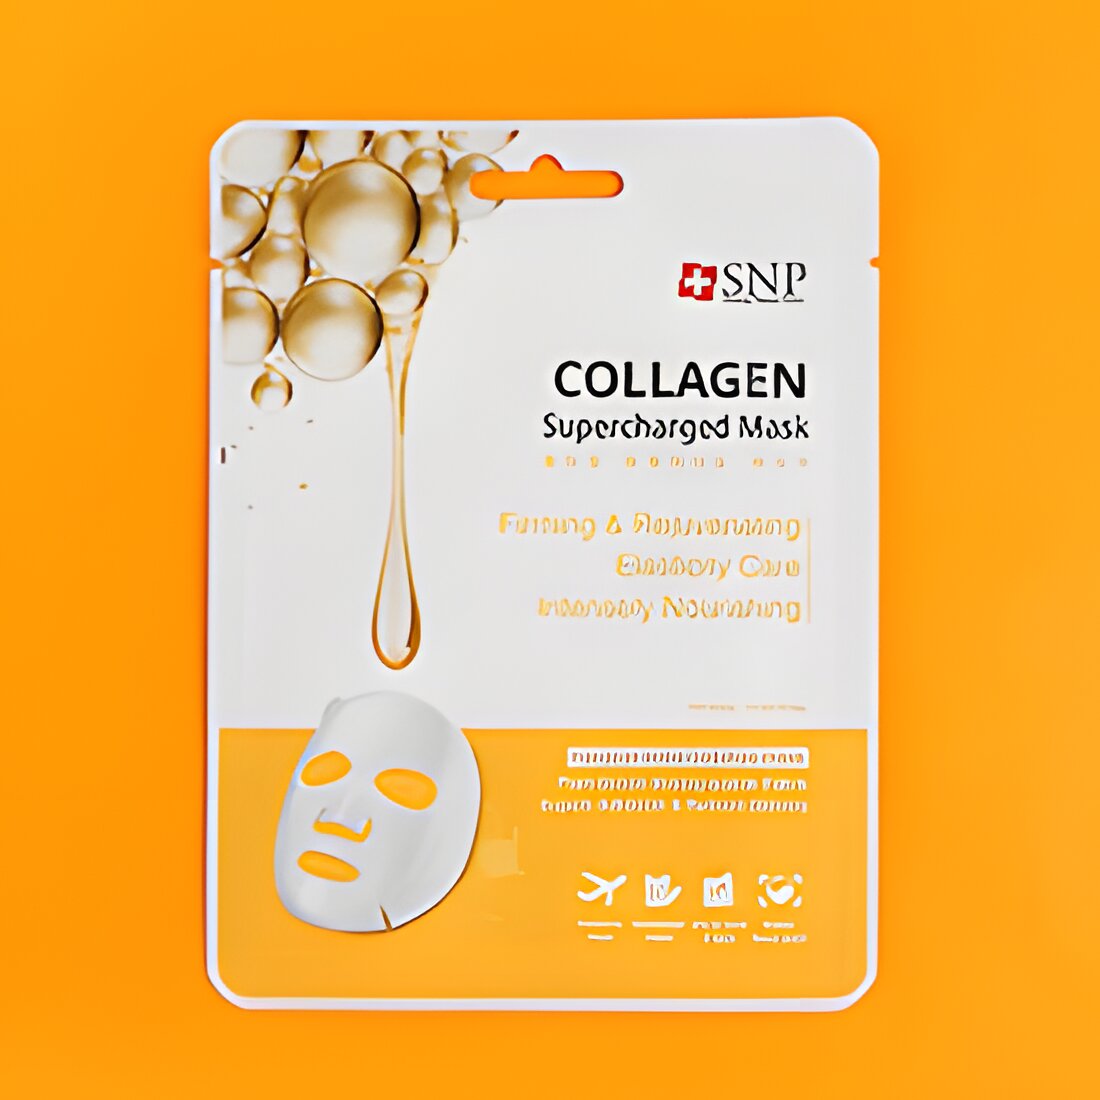 Free SNP Supercharged Collagen Mask